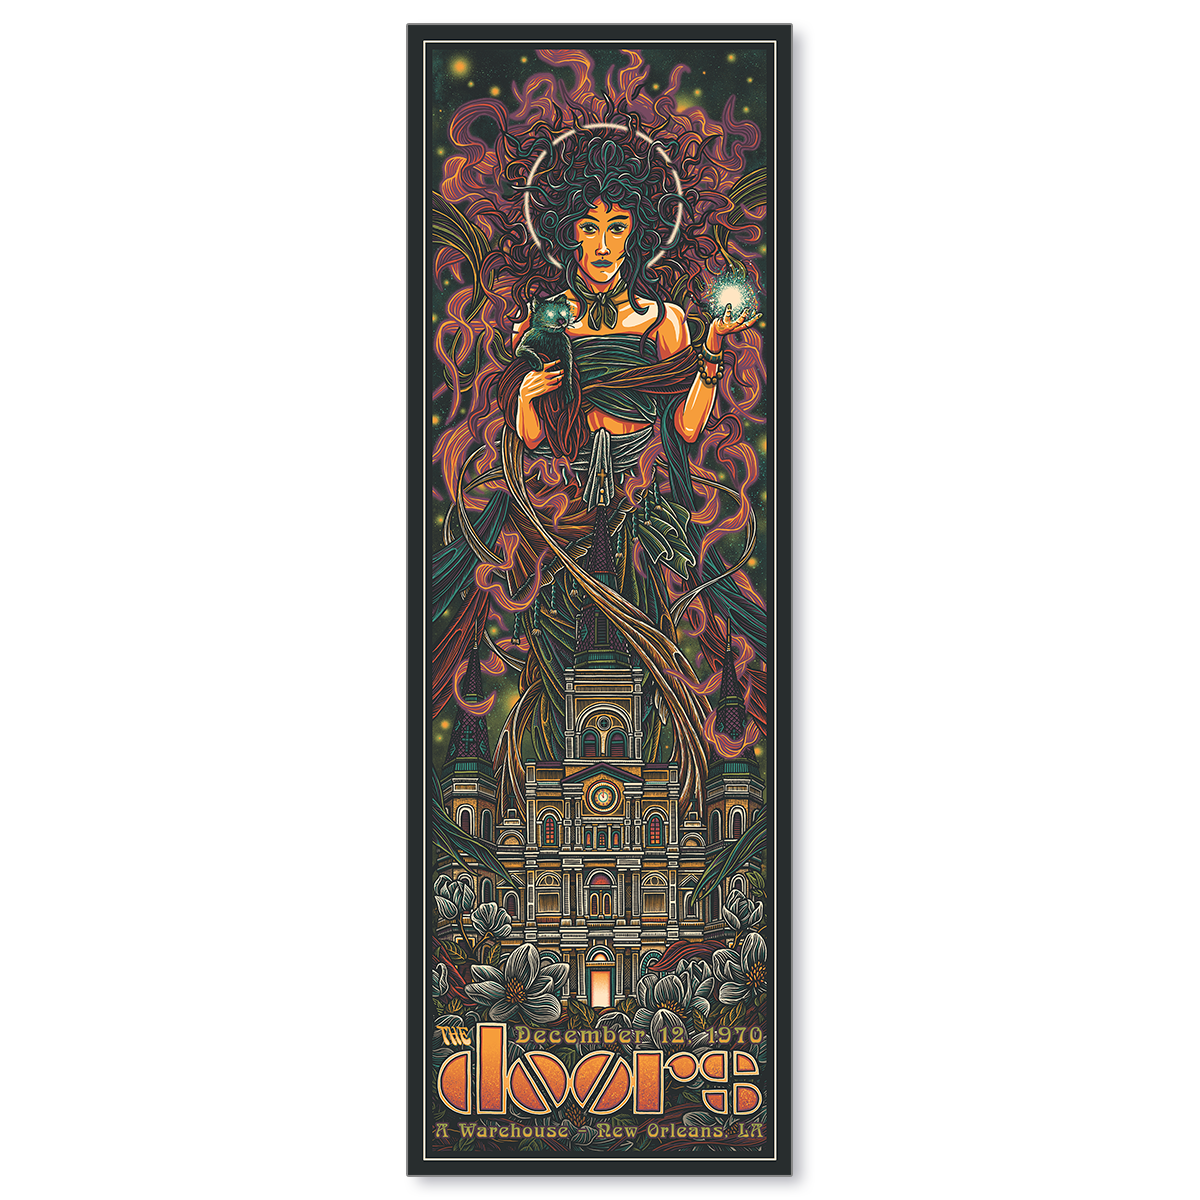 The Doors New Orleans 1970 by Luke Martin (Main Edition Foil Studio Copy)